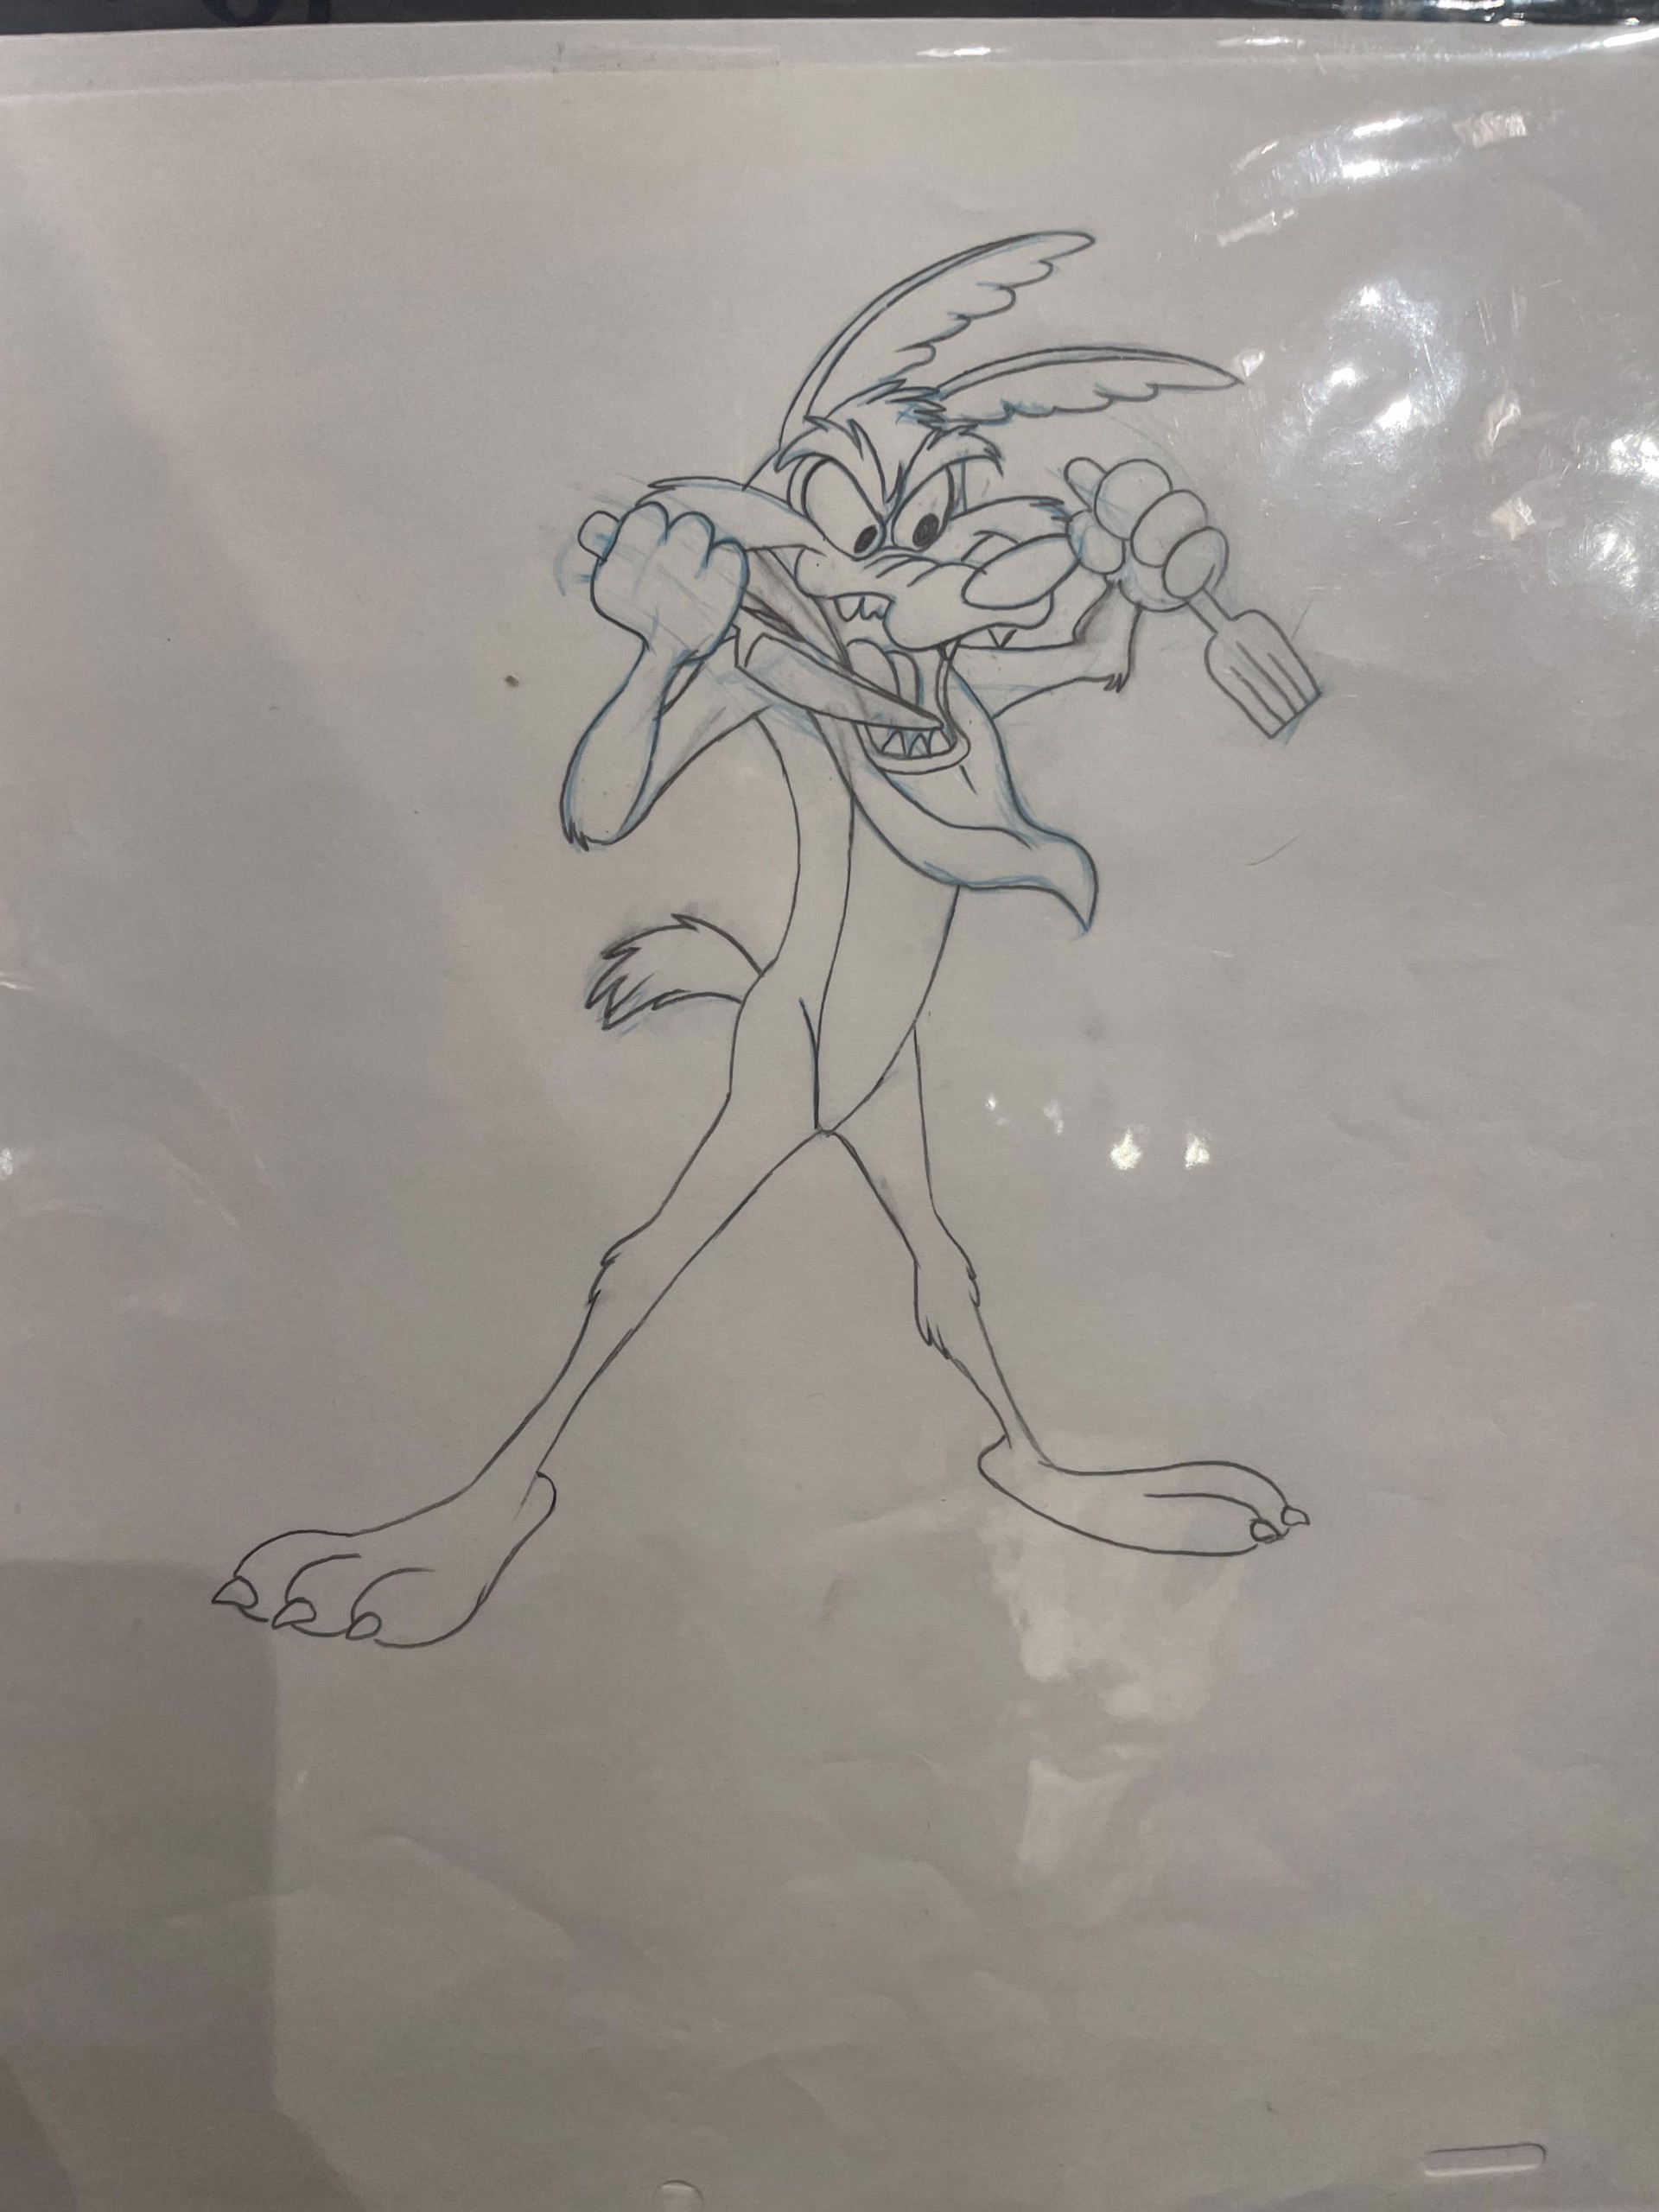 Wile E. Coyote, Concept Drawing, Chariots of Fur,  CJ16-002-014 by Chuck Jones